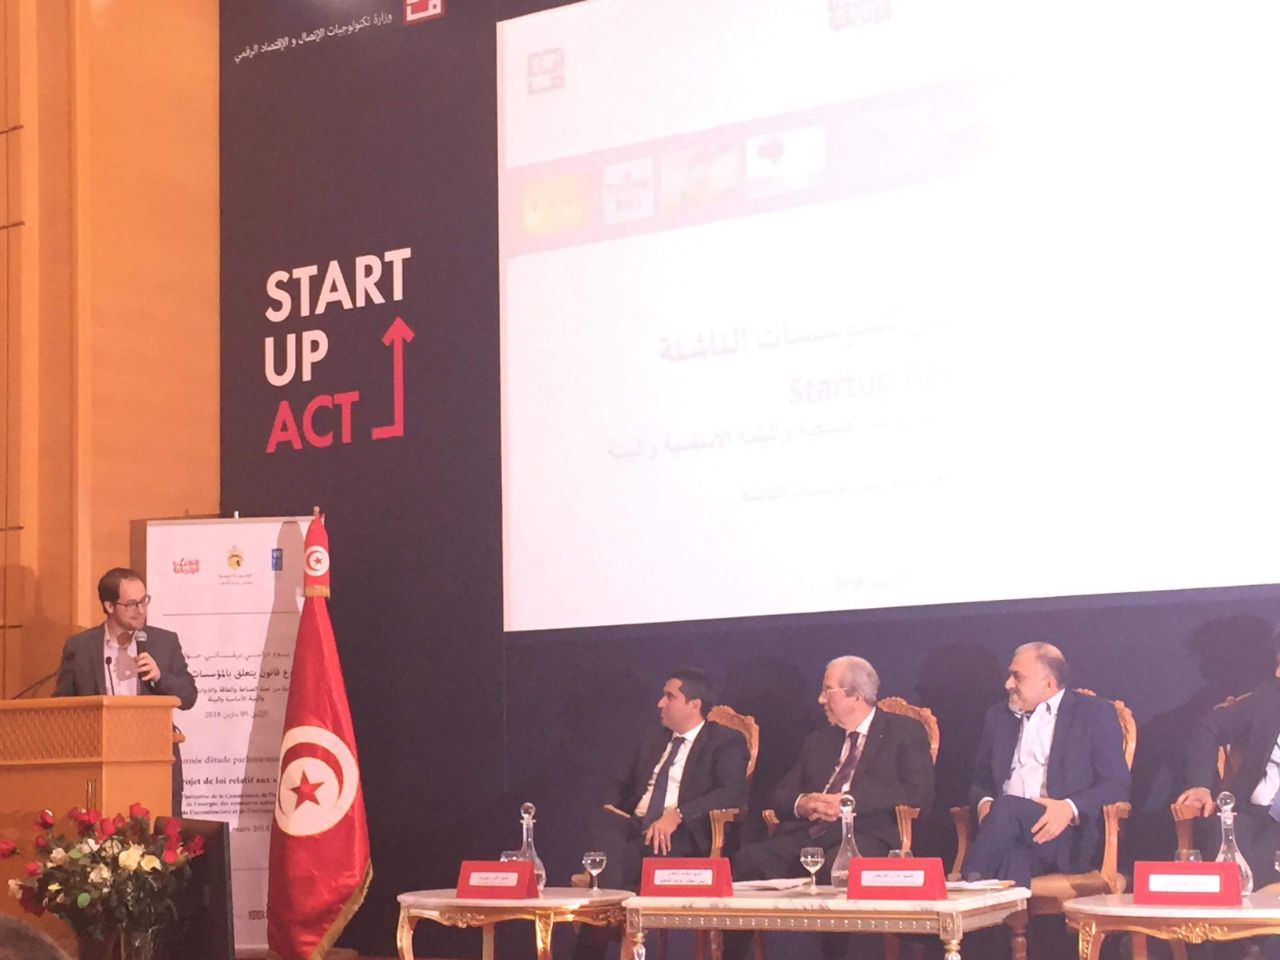 Here Are 5 Reasons Why Governments Should Implement Startup Acts Like Tunisia’s